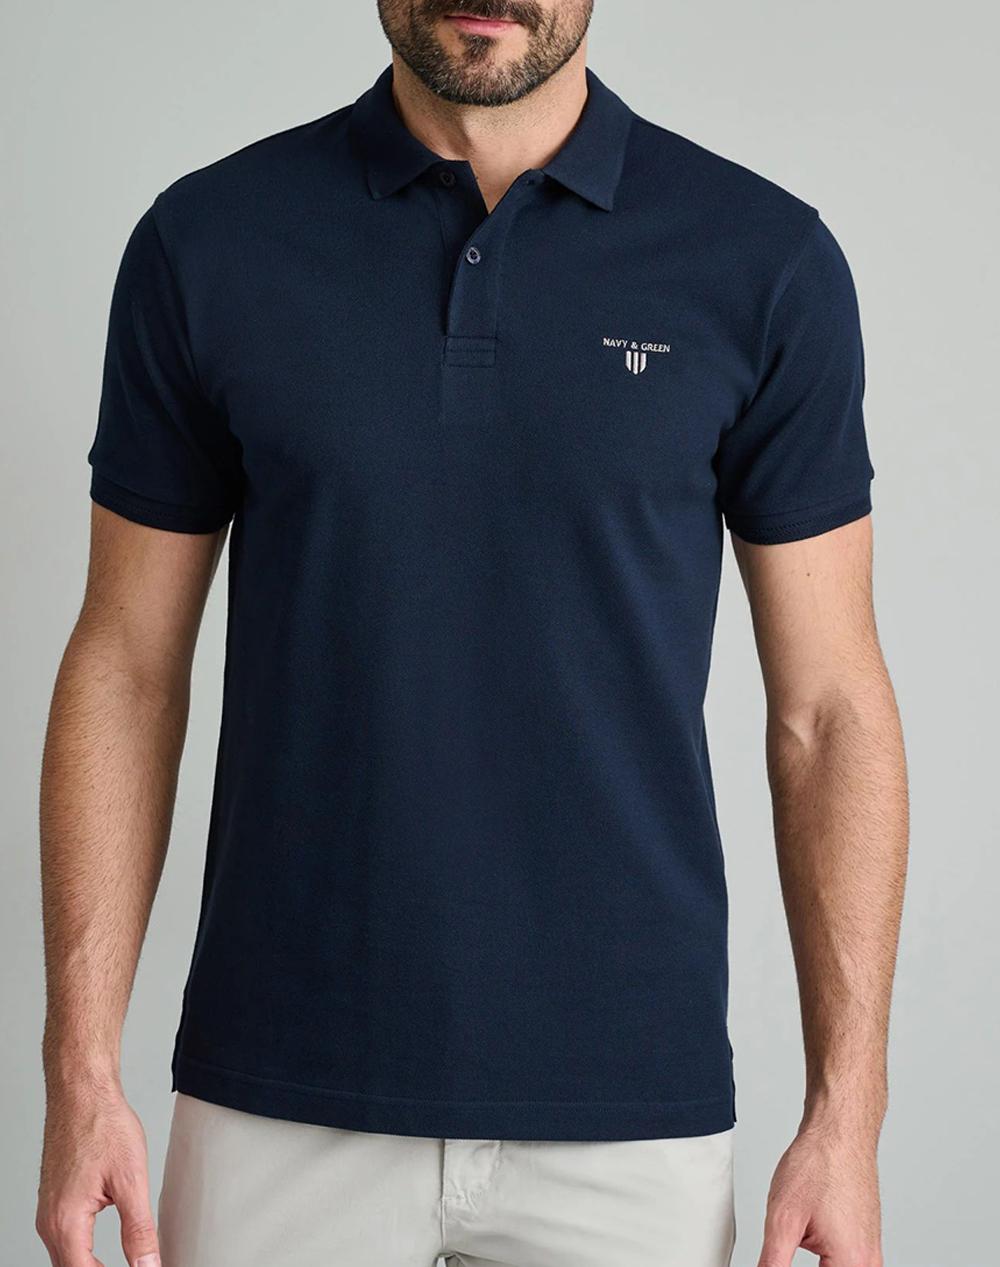 NAVY&GREEN POLO ΜΠΛΟΥΖΑΚΙ-YOUNG LINE 24EY.007/PL/YL-MARINE BLUE NavyBlue 3820PNAVY3410092_XR04822